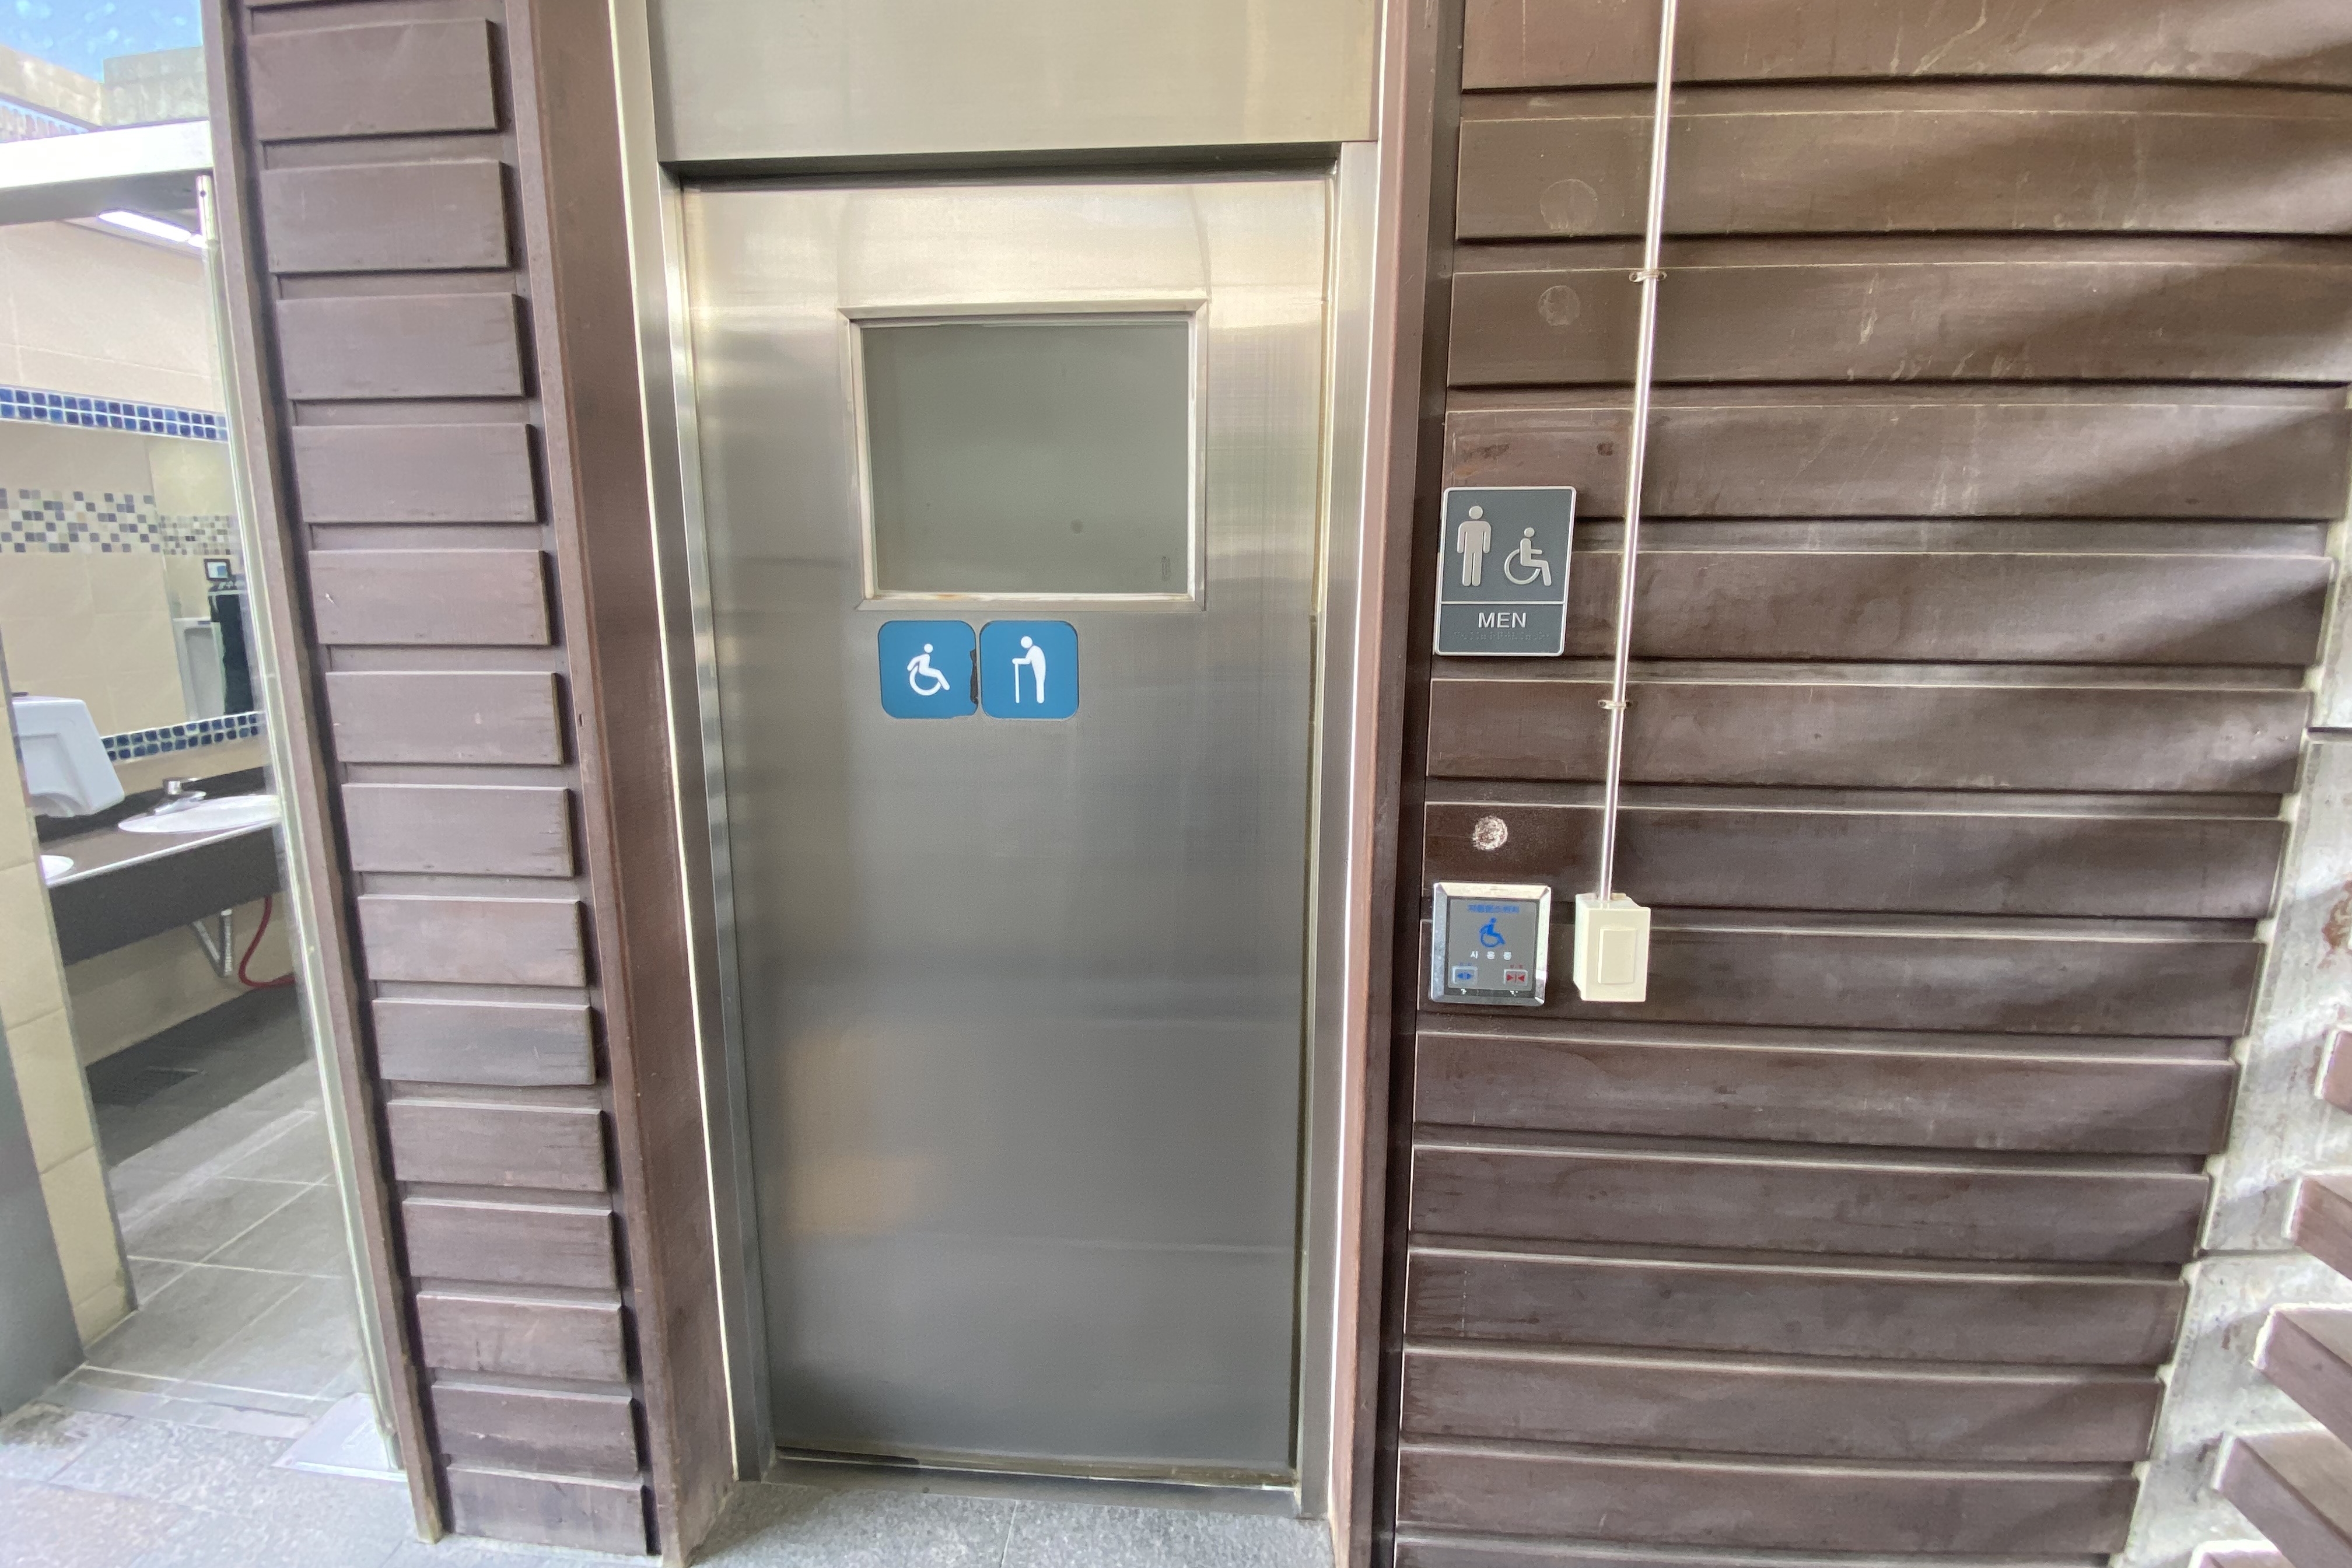 Accessible restroom0 : Exterior view of the accessible restroom 